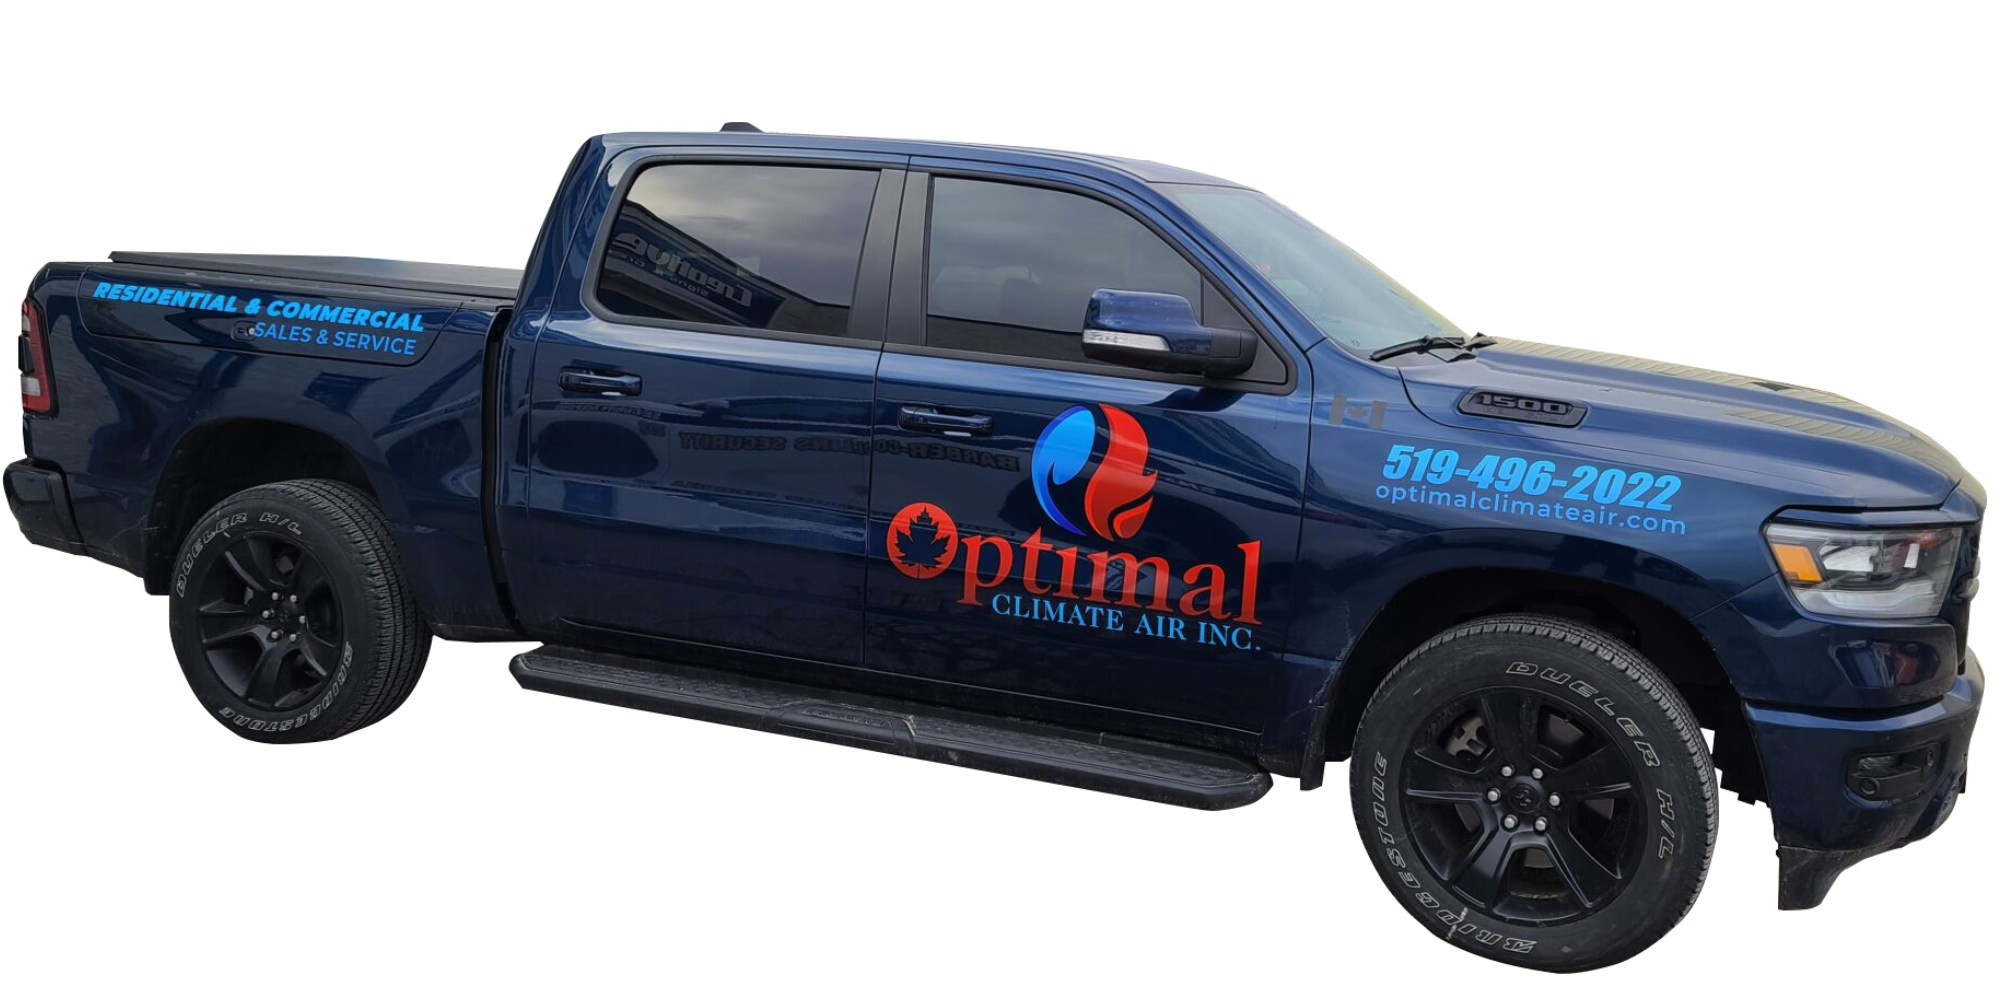 Optimal Climate Air Inc | About Us